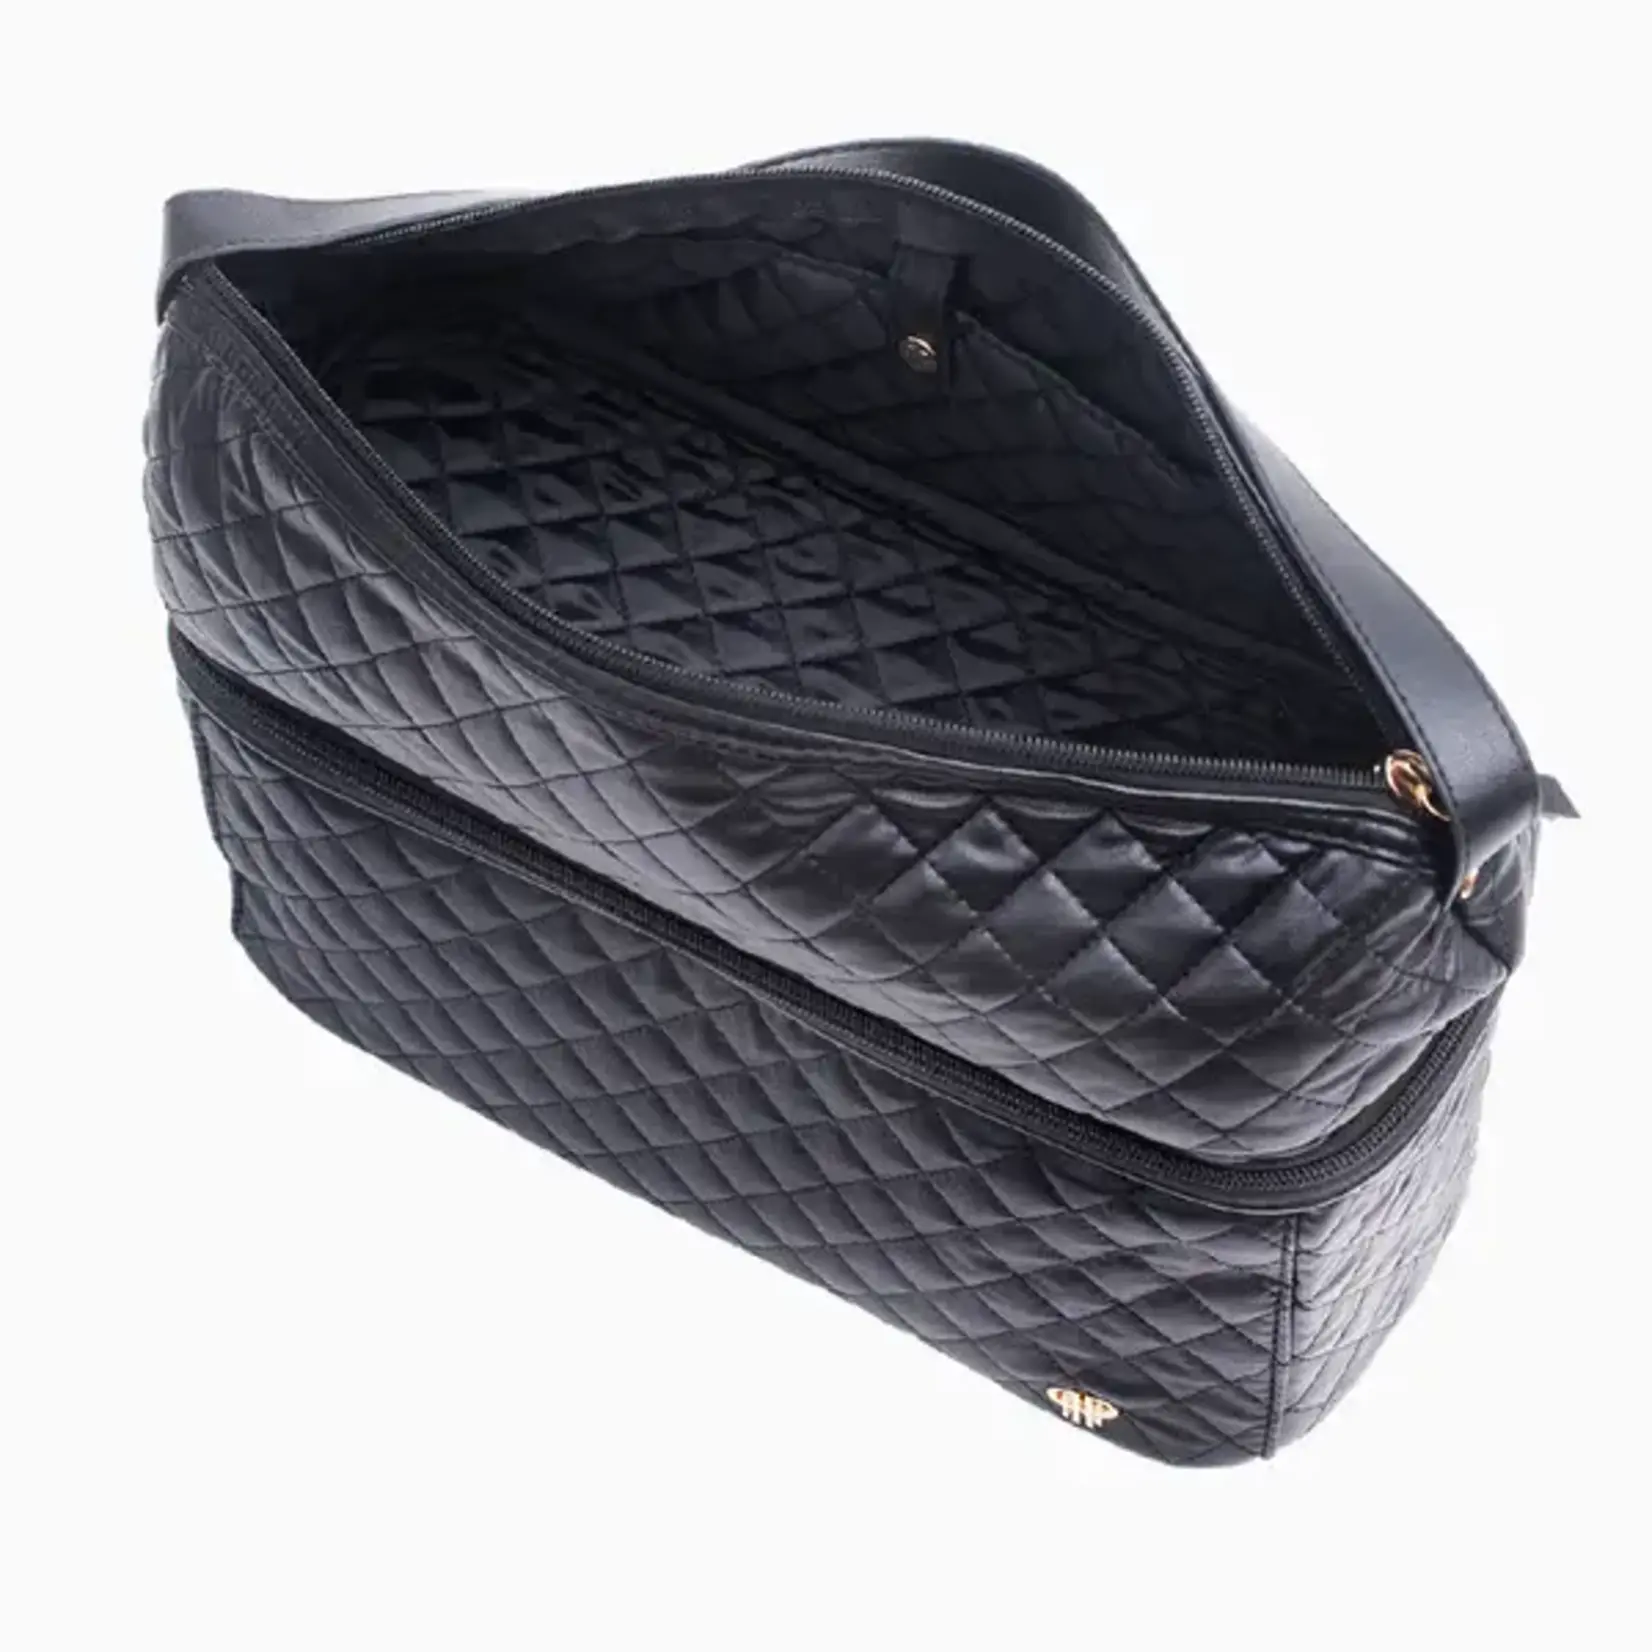 Stylist Bag - Timeless Quilted